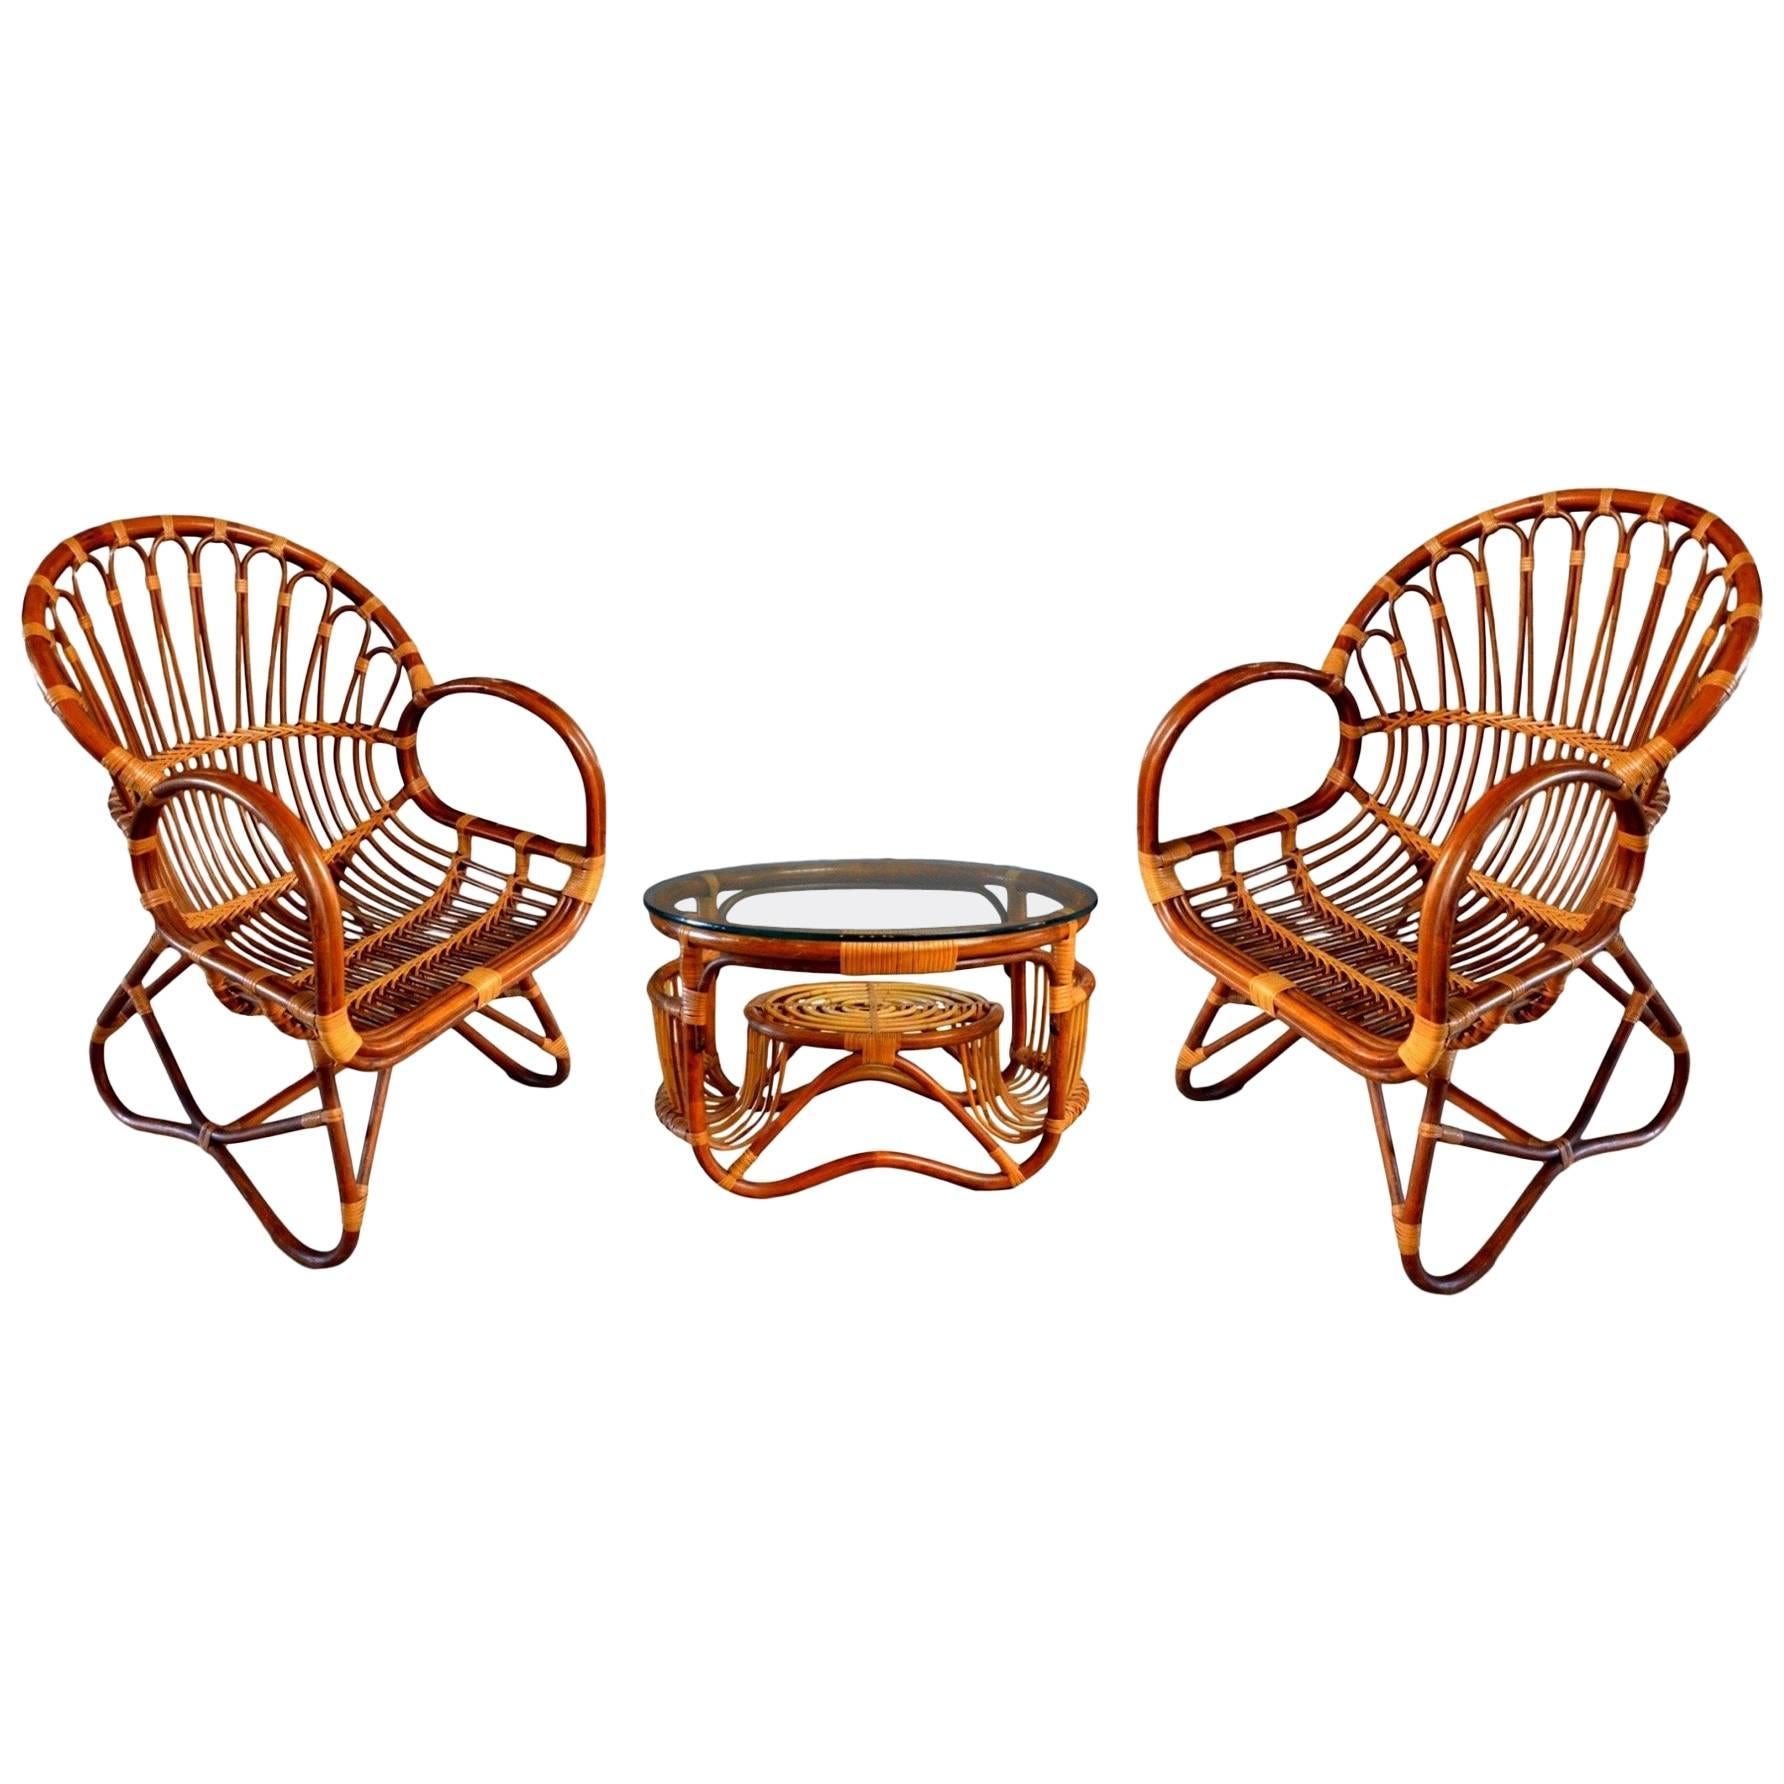 Sculptural Bamboo and Rattan Chairs with Matching Side Table